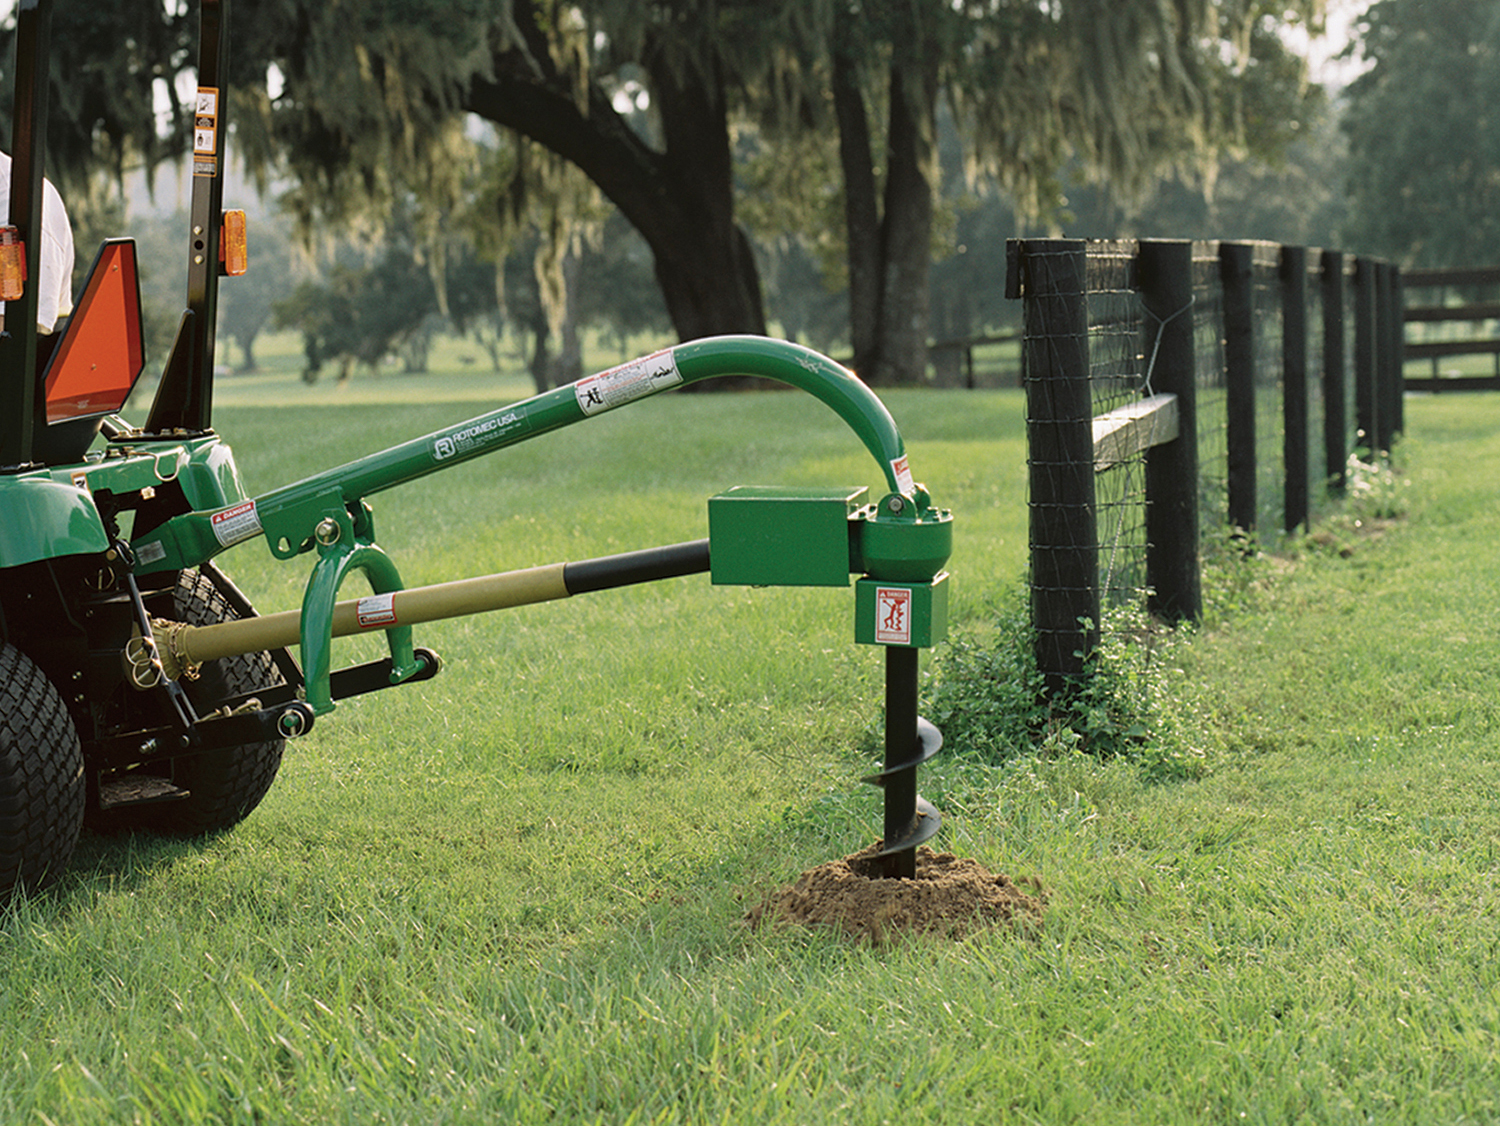 A green lawn tractor digs a post hole along a fence line. Dirt is exposed on a green grassy area. Call 811 before you dig.